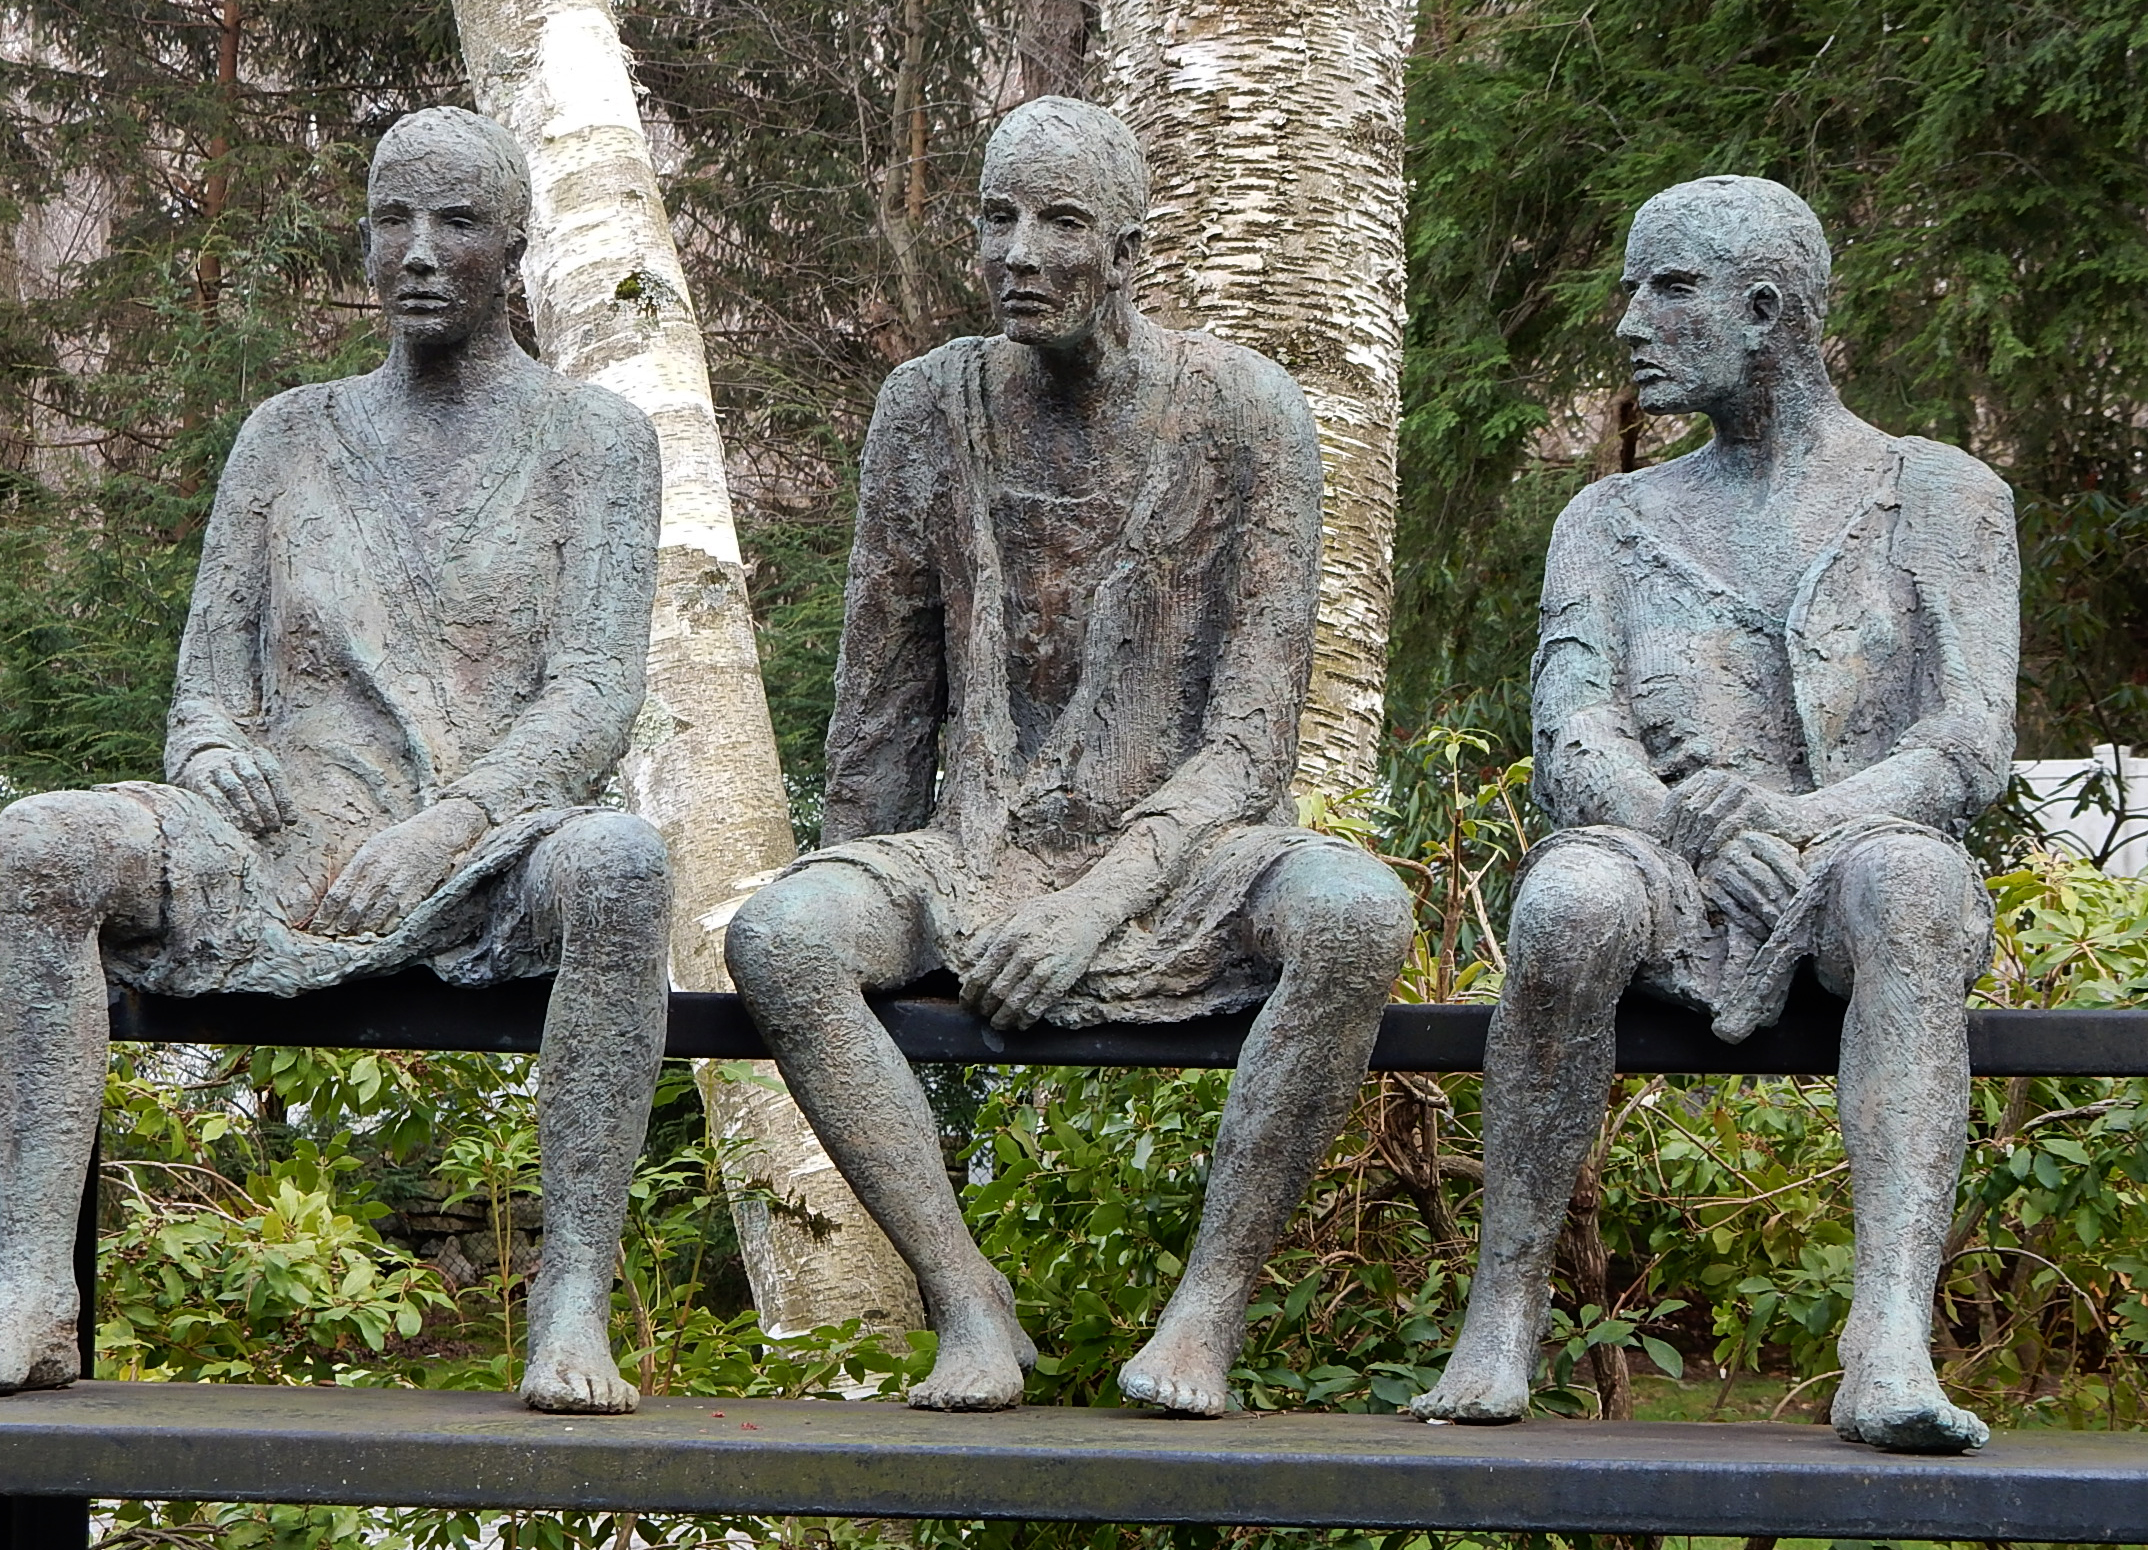 'Three Men on a Bench,' a bronze outdoor figural group by Dutch-born sculptor Hannek Beaumont has an estimate of $10,000-$20,000. Roland Auctions NY images